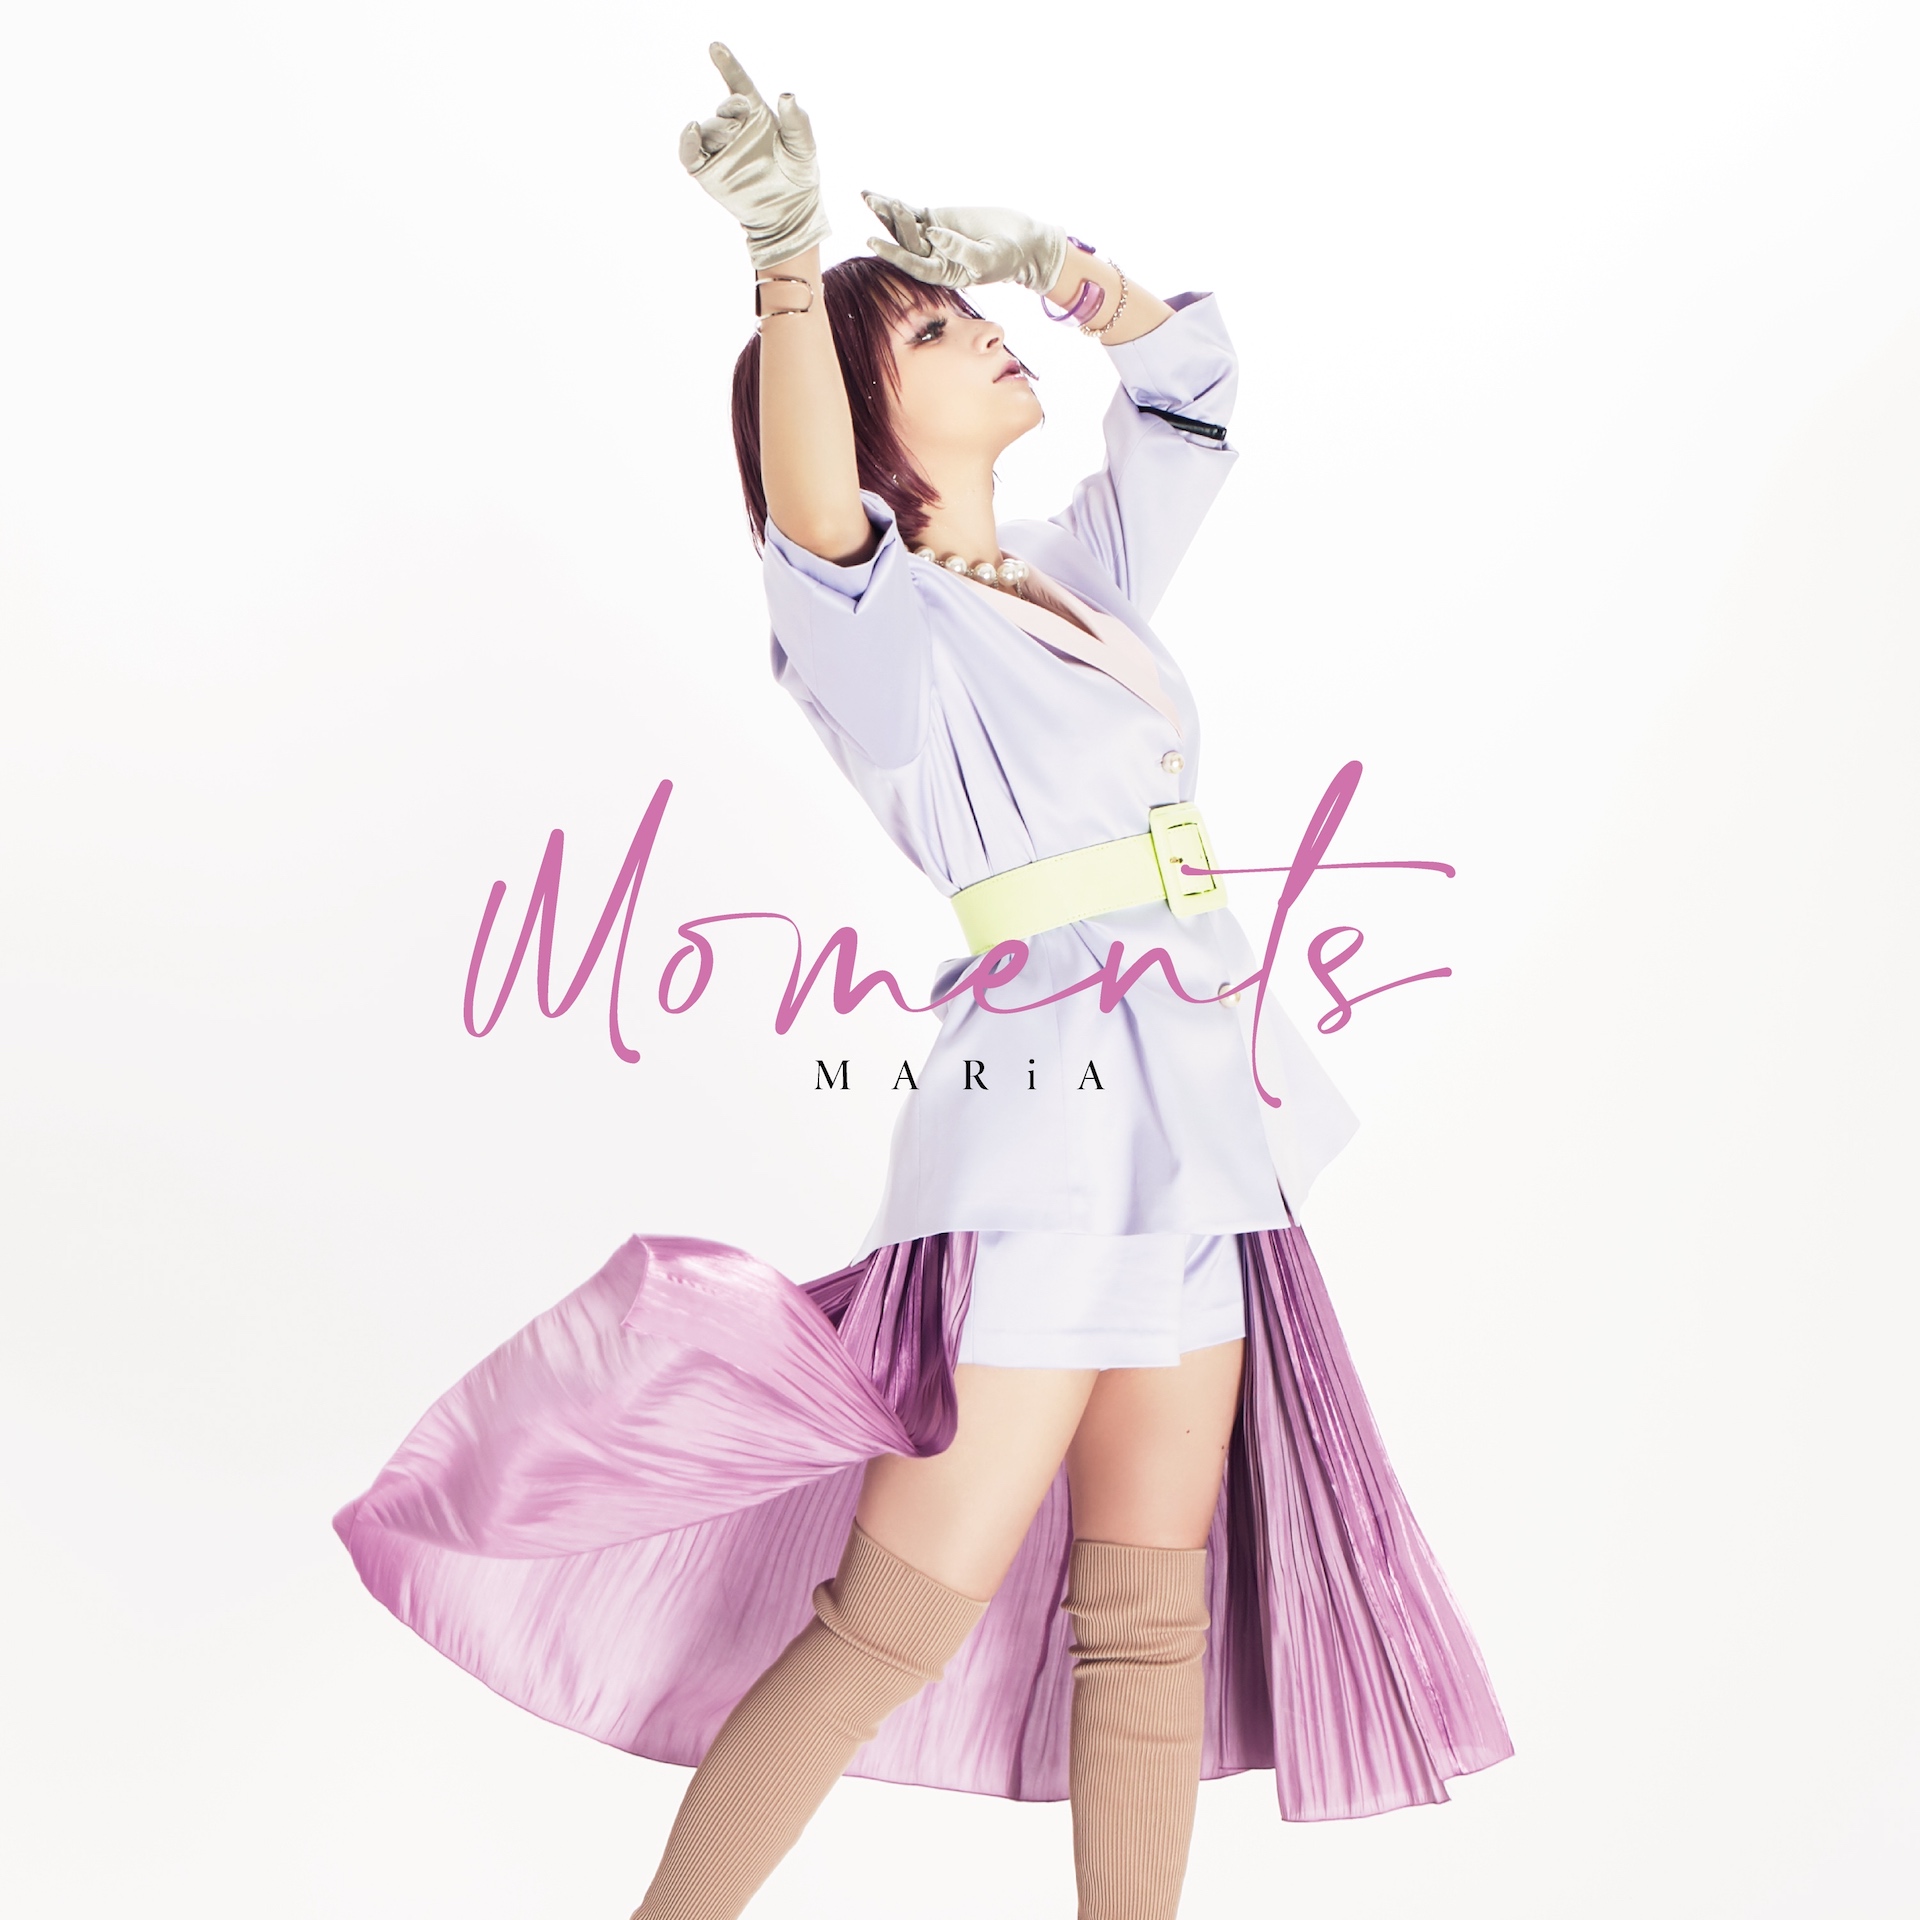 MARiA “Moments” Limited Edition(CD+Blu-ray) Release on June 22nd,2022